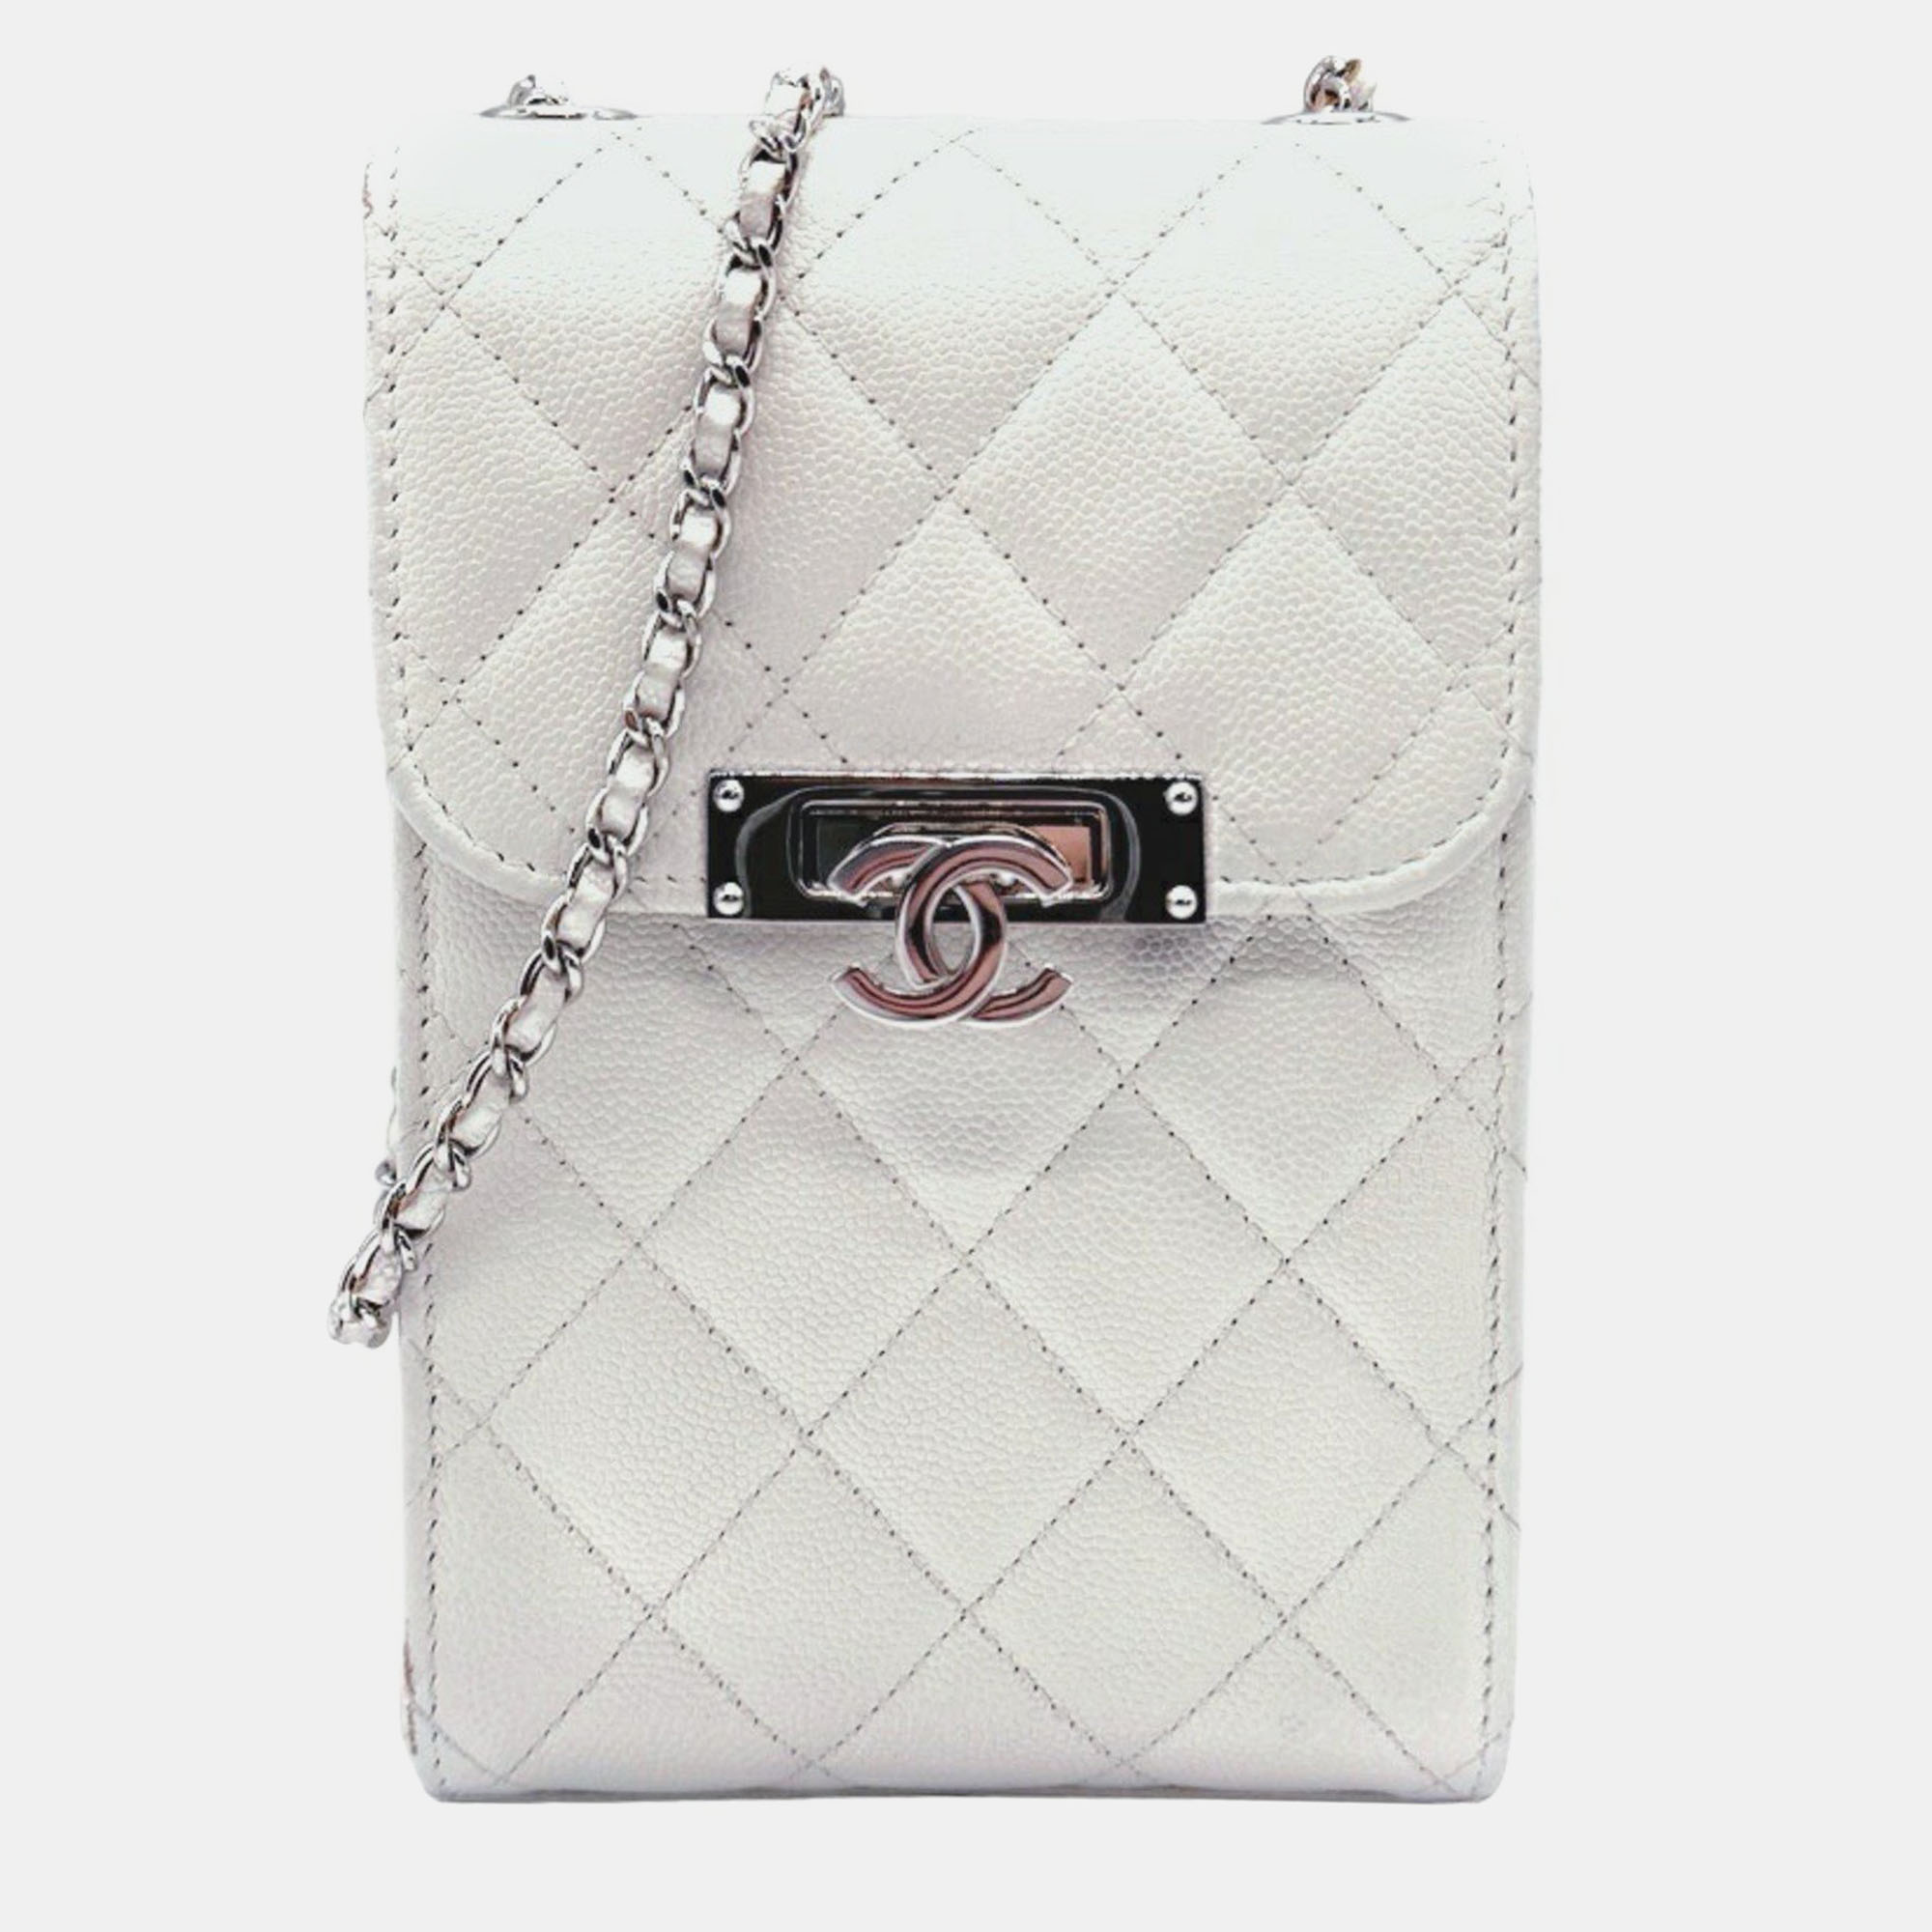 Chanel white caviar quilted golden class phone holder